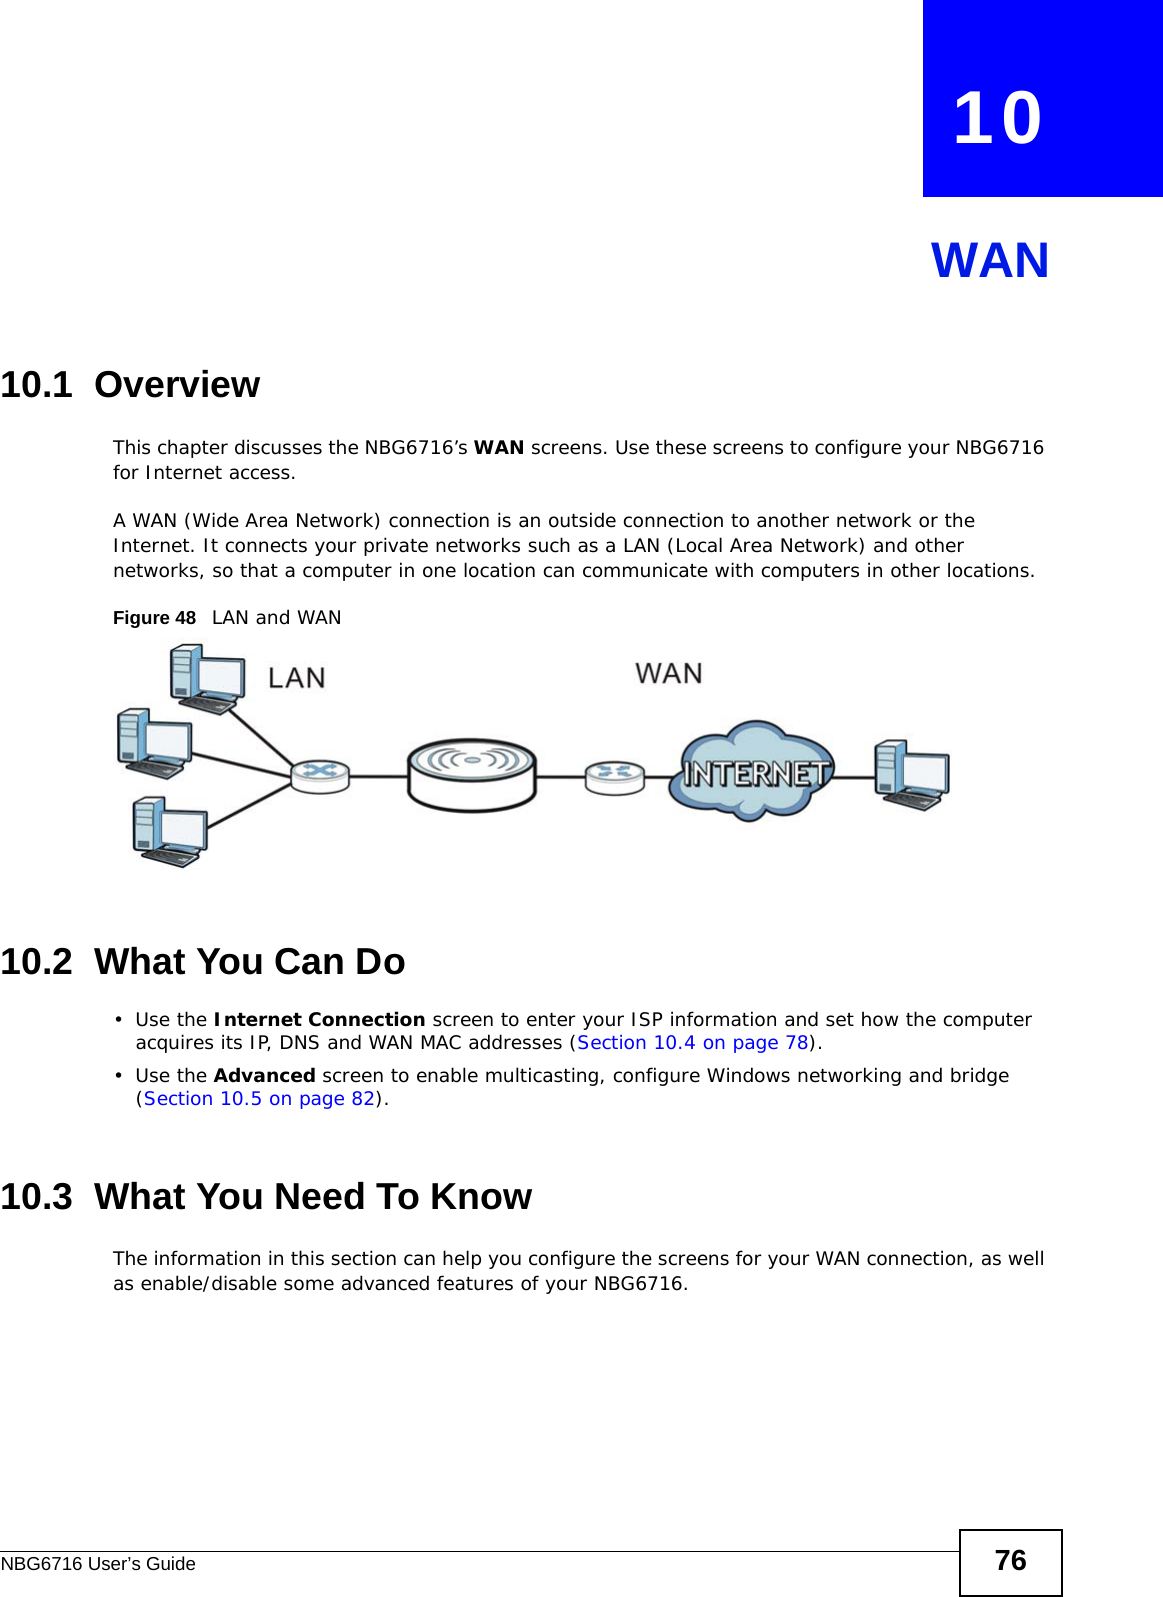 NBG6716 User’s Guide 76CHAPTER   10WAN10.1  OverviewThis chapter discusses the NBG6716’s WAN screens. Use these screens to configure your NBG6716 for Internet access.A WAN (Wide Area Network) connection is an outside connection to another network or the Internet. It connects your private networks such as a LAN (Local Area Network) and other networks, so that a computer in one location can communicate with computers in other locations.Figure 48   LAN and WAN10.2  What You Can Do•Use the Internet Connection screen to enter your ISP information and set how the computer acquires its IP, DNS and WAN MAC addresses (Section 10.4 on page 78).•Use the Advanced screen to enable multicasting, configure Windows networking and bridge (Section 10.5 on page 82).10.3  What You Need To KnowThe information in this section can help you configure the screens for your WAN connection, as well as enable/disable some advanced features of your NBG6716.